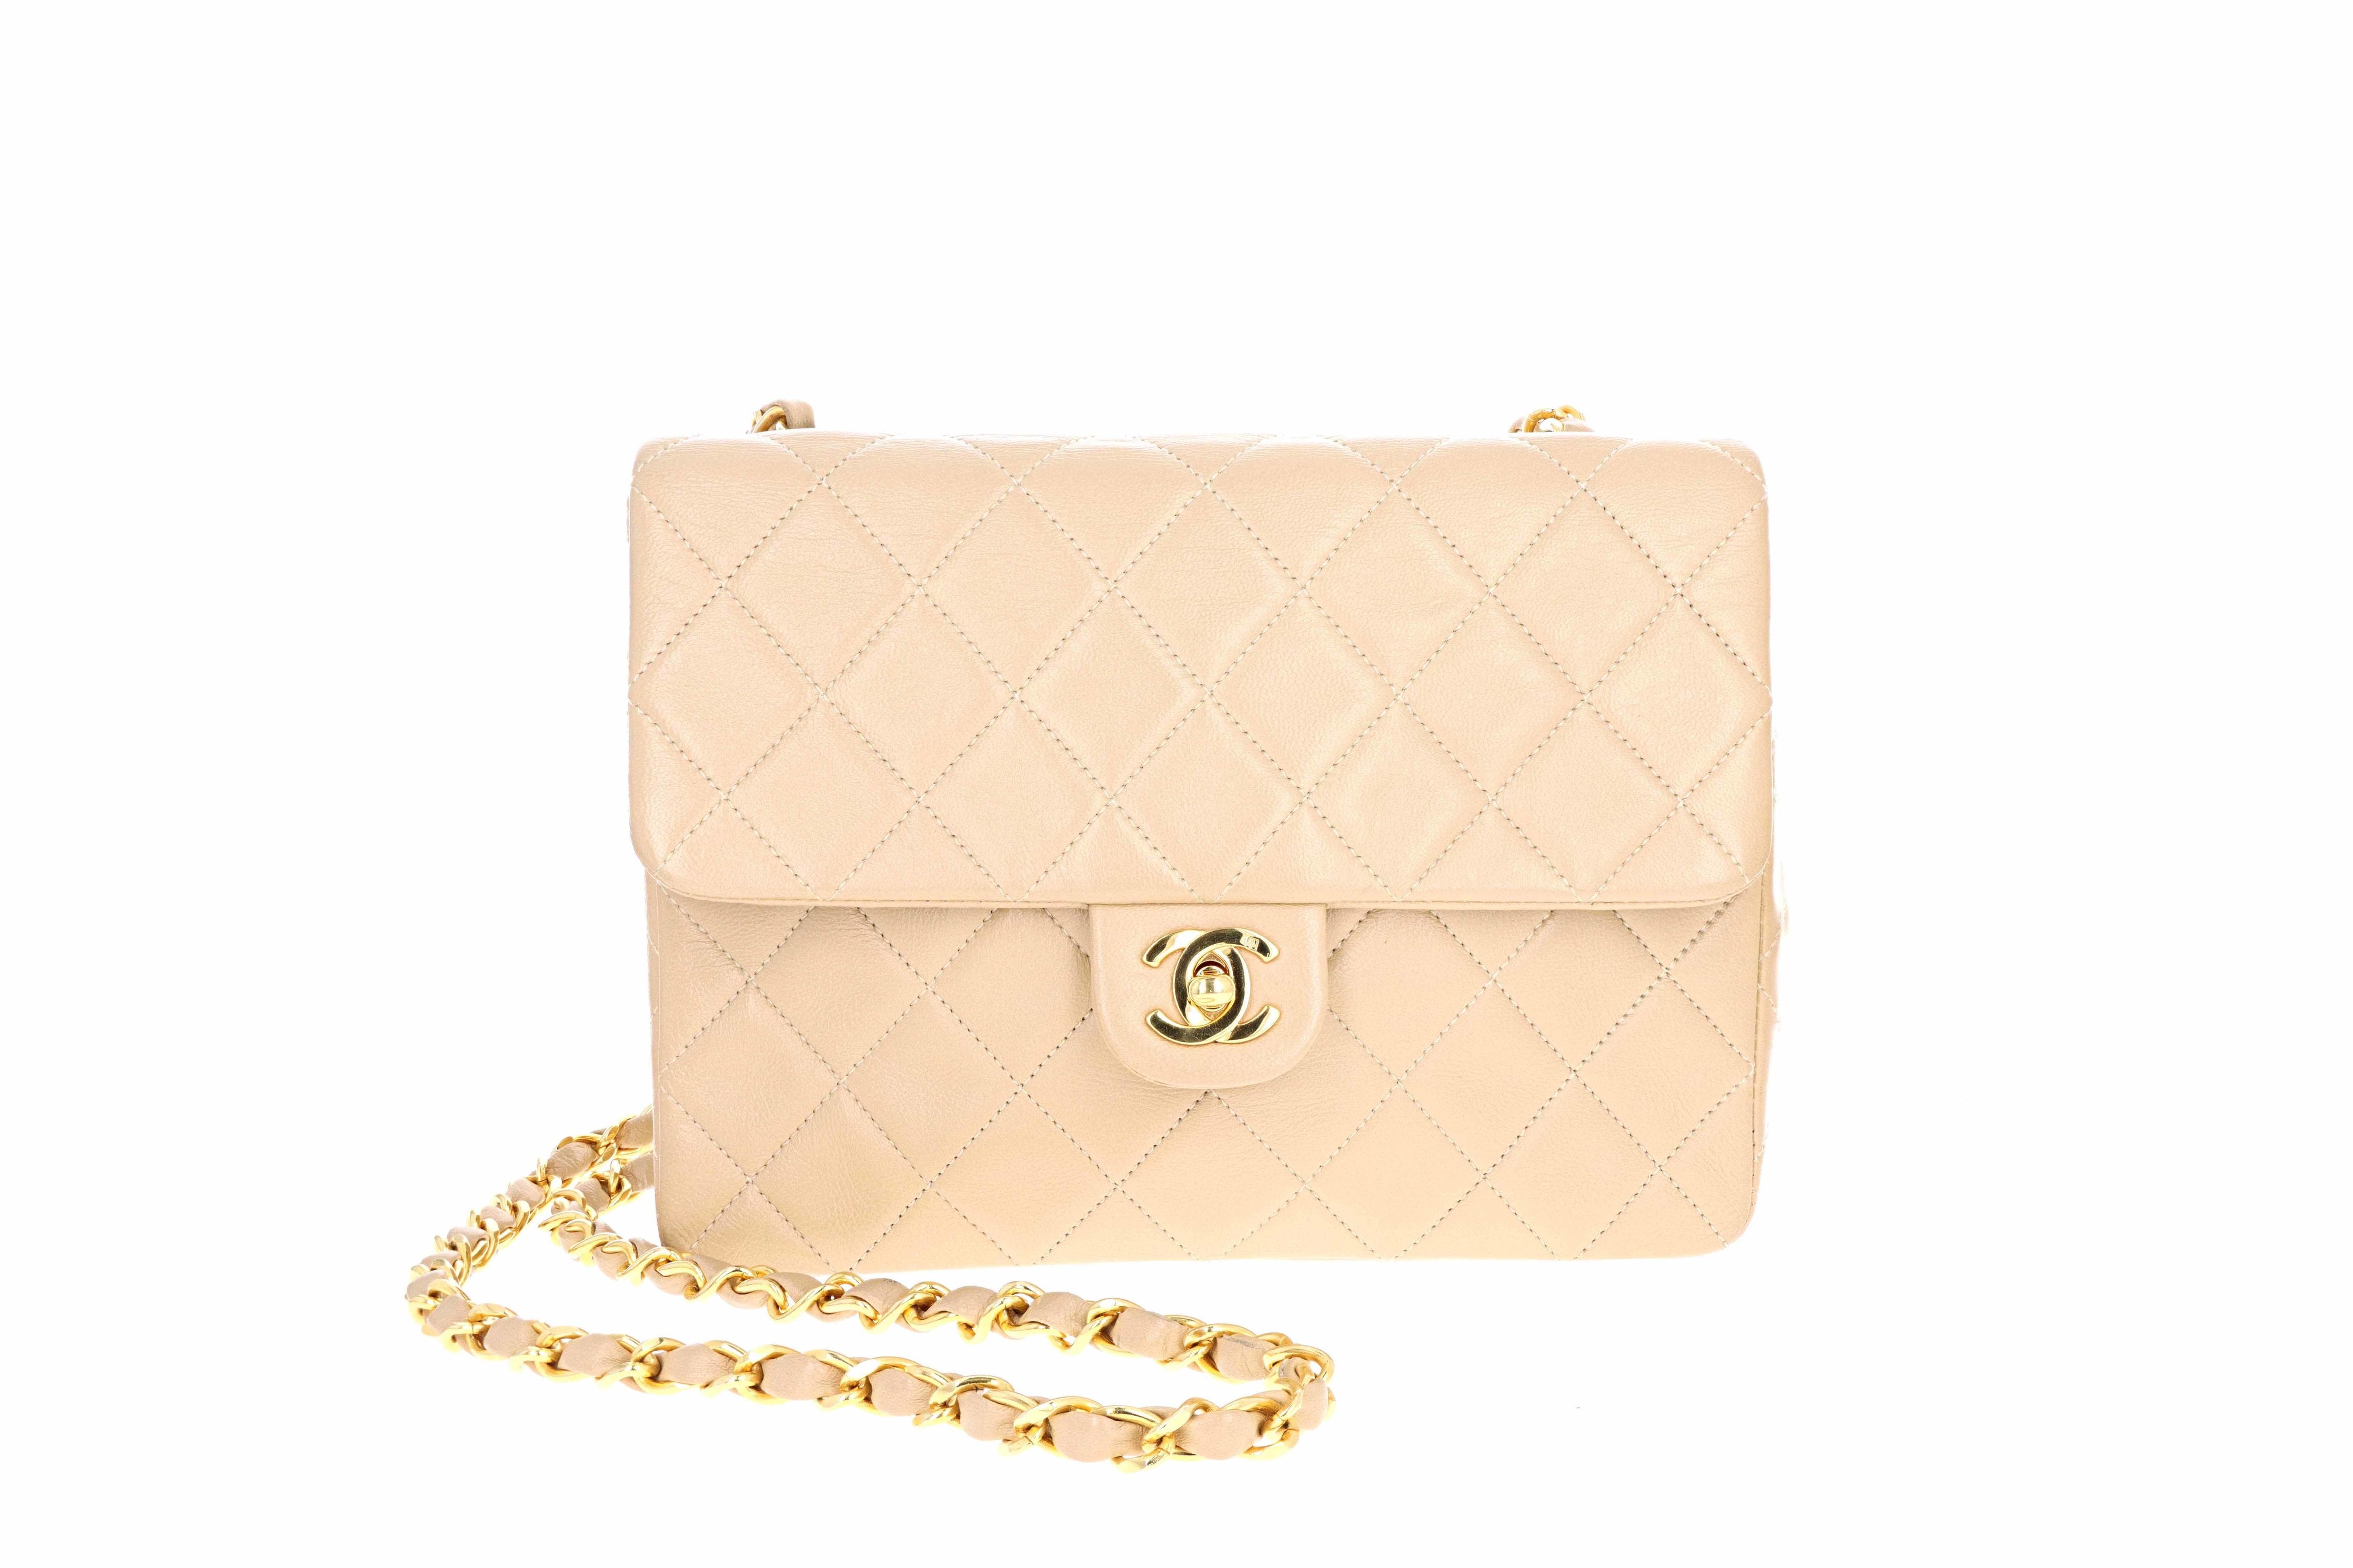 Vintage and Musthaves. Chanel timeless 2.55 square classic mini bag